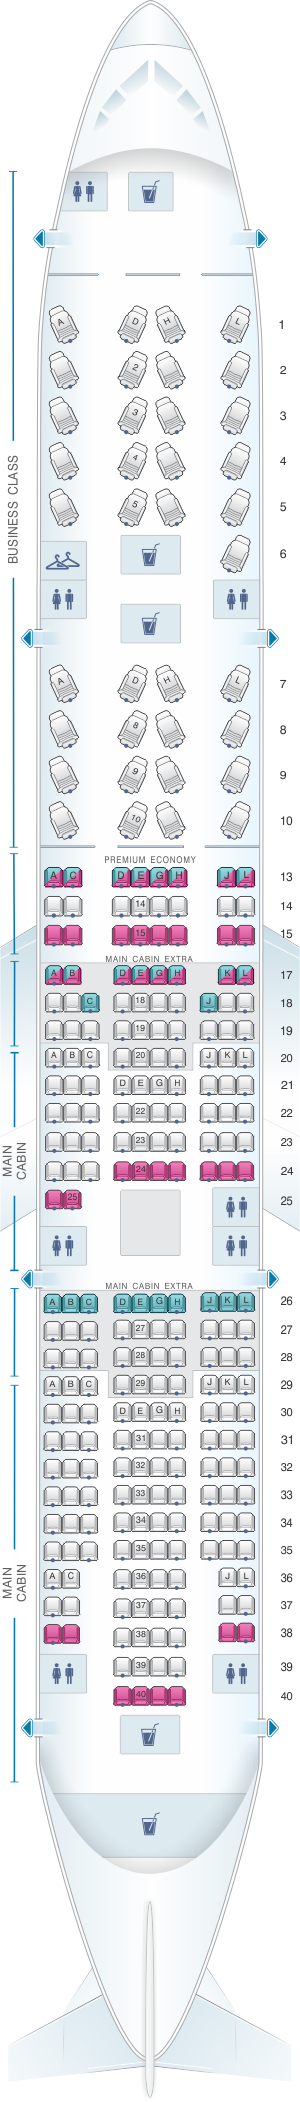 Seat Map American Airlines Boeing B777